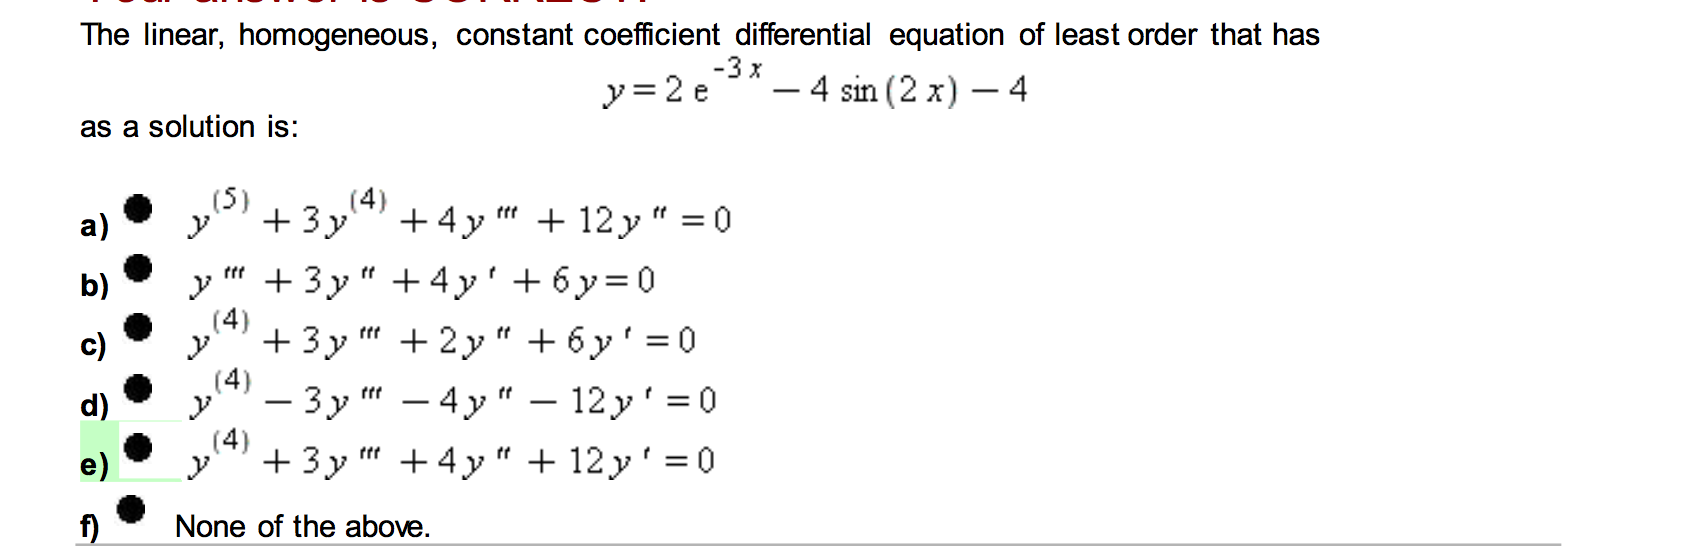 linear differential equation with constant coefficients solved examples